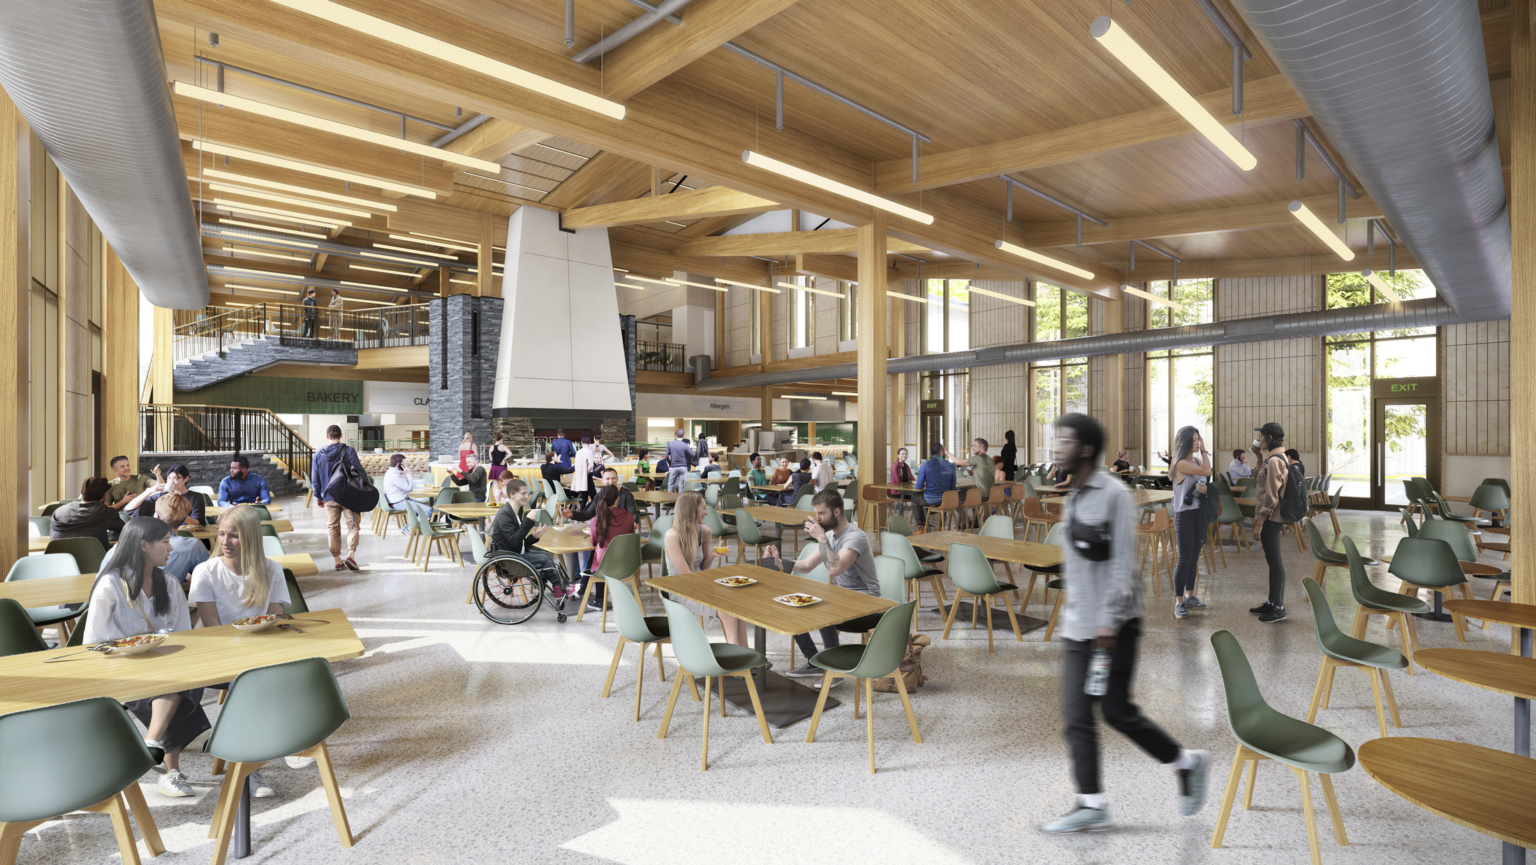 Main dining area with wood beams and ceiling, flexible seating, and plenty of natural daylight at Swarthmore College Dining and Community Commons.